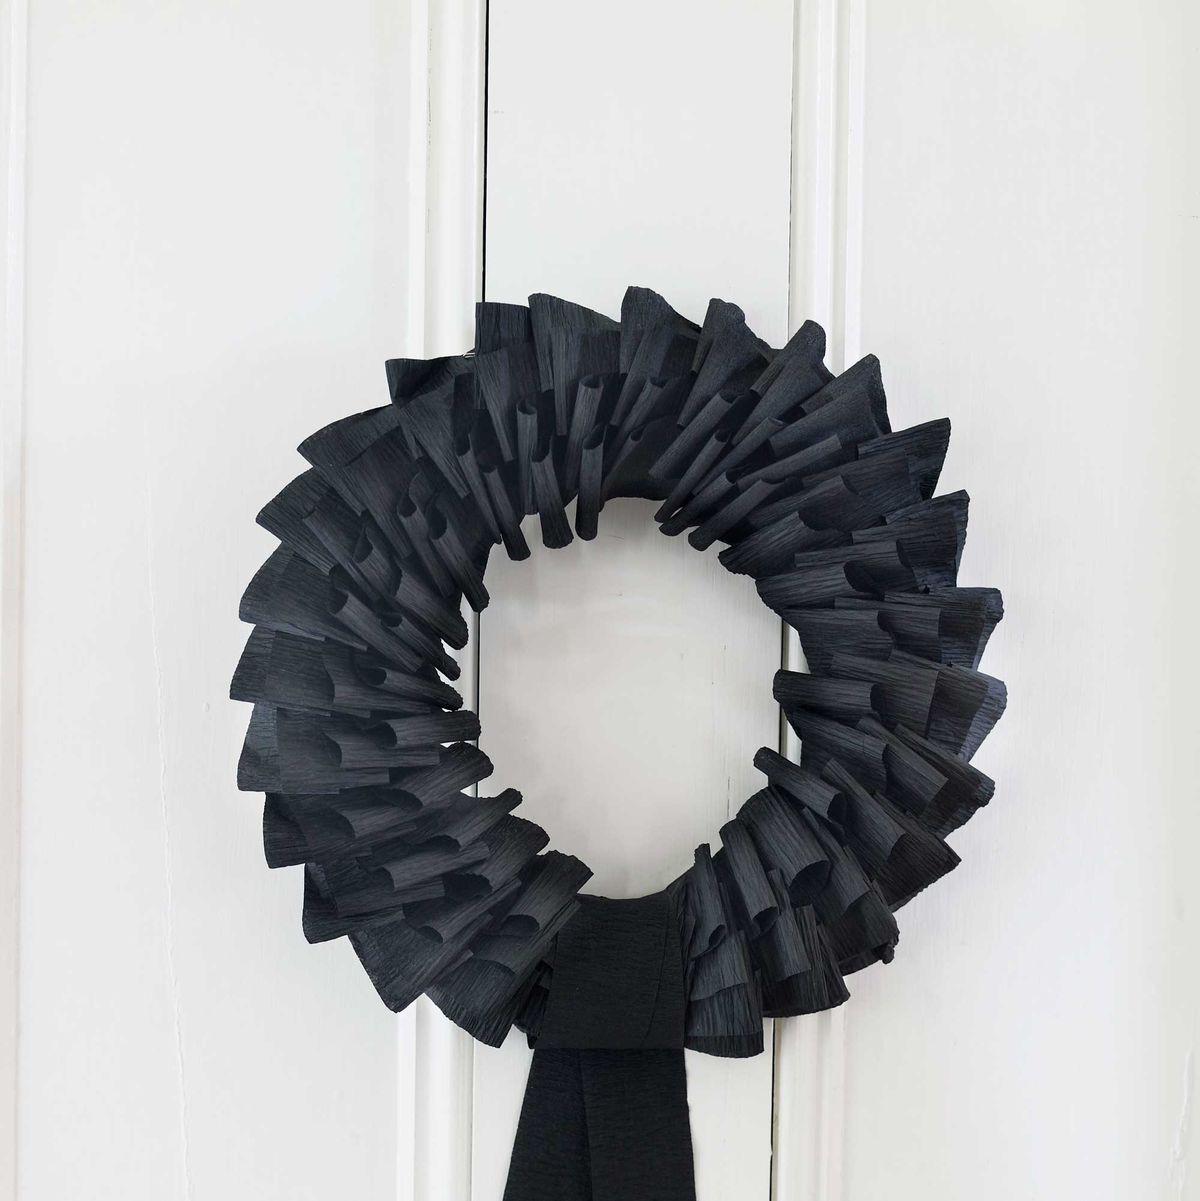 How to Make a Paper Wreath - Black Paper Wreath Craft